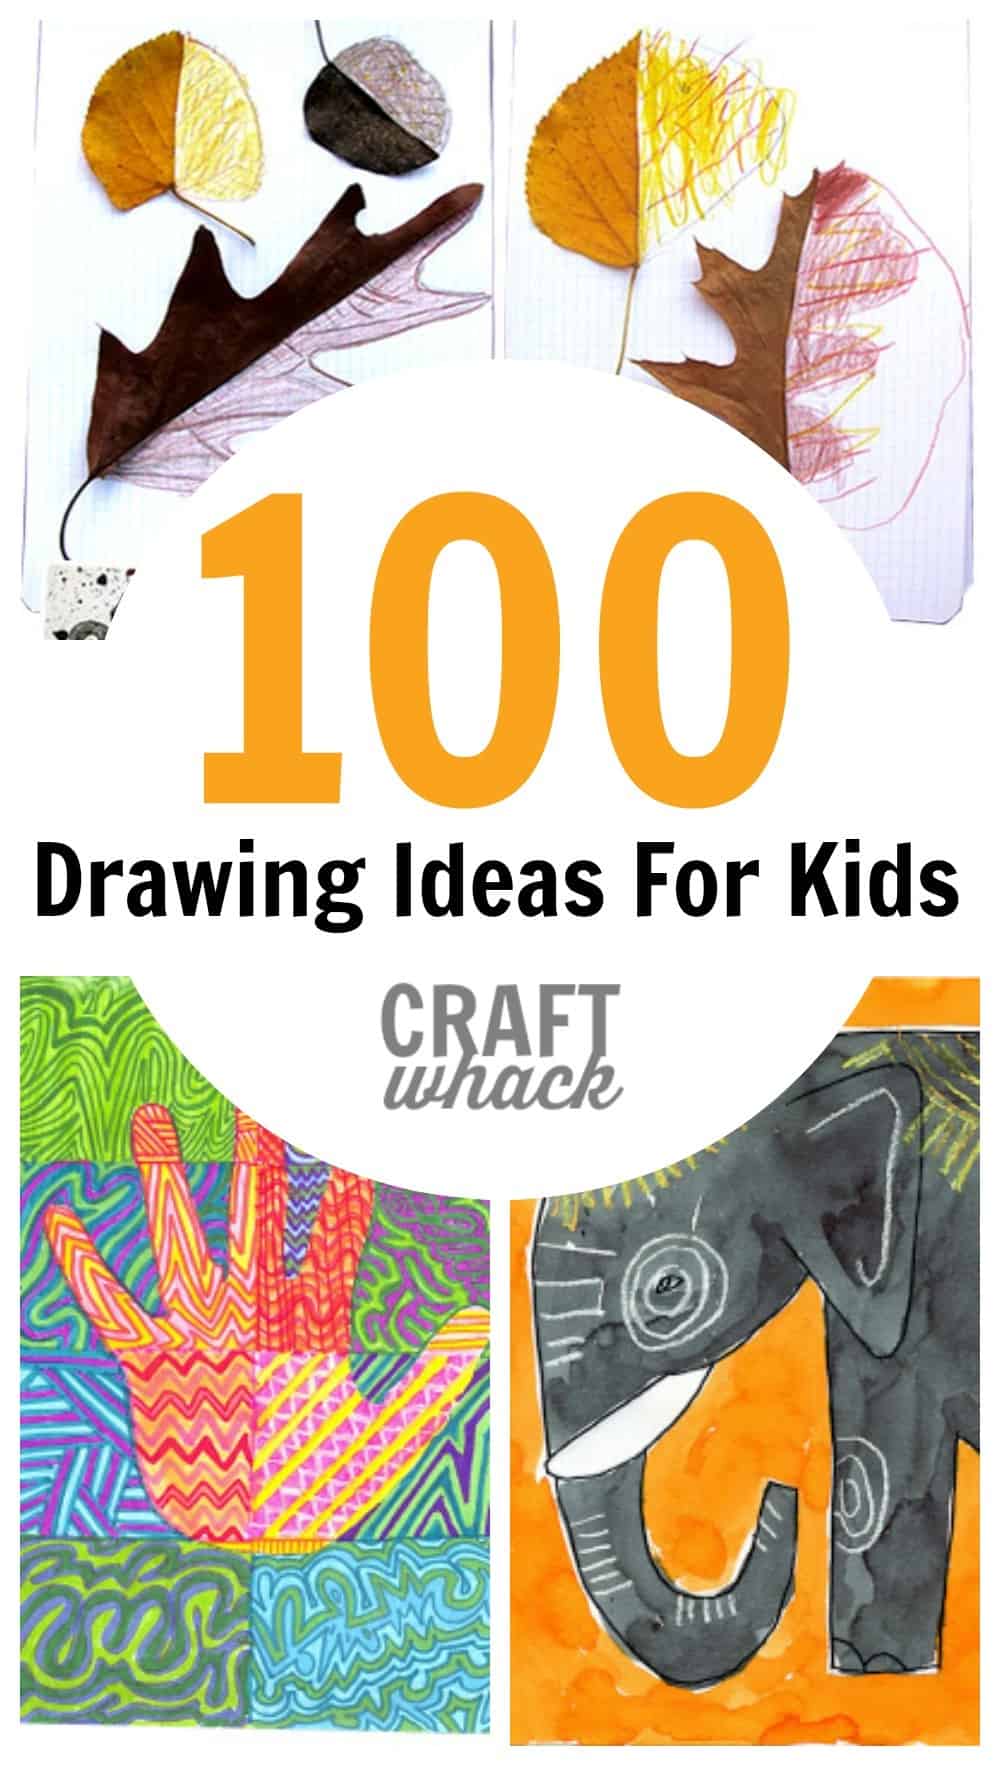 drawings - drawing ideas for kids